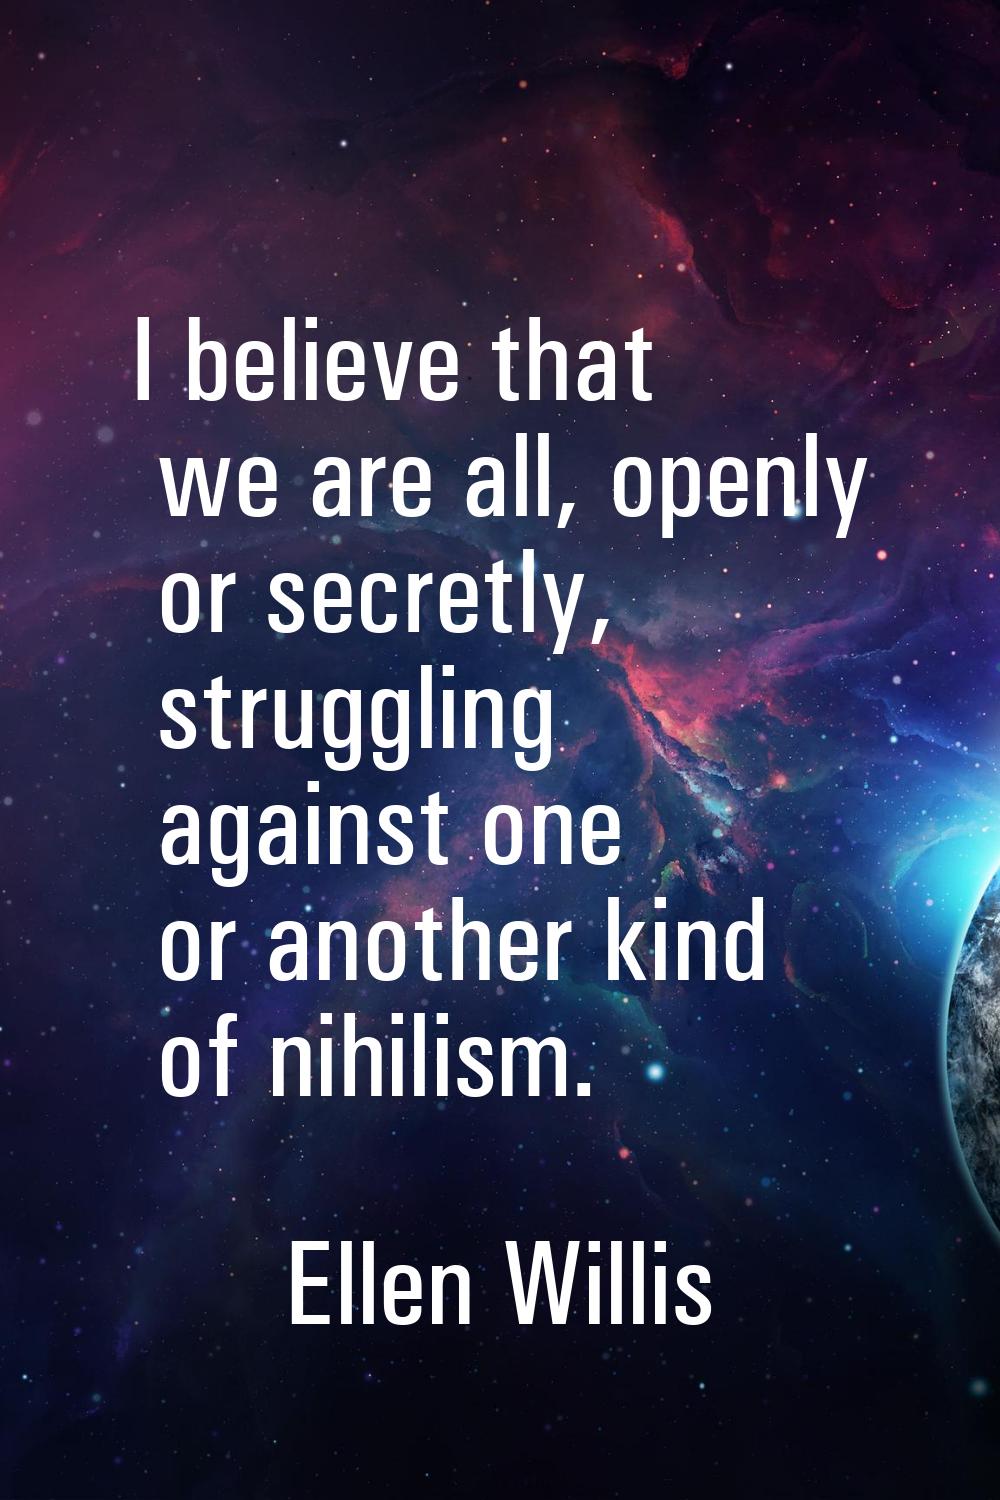 I believe that we are all, openly or secretly, struggling against one or another kind of nihilism.